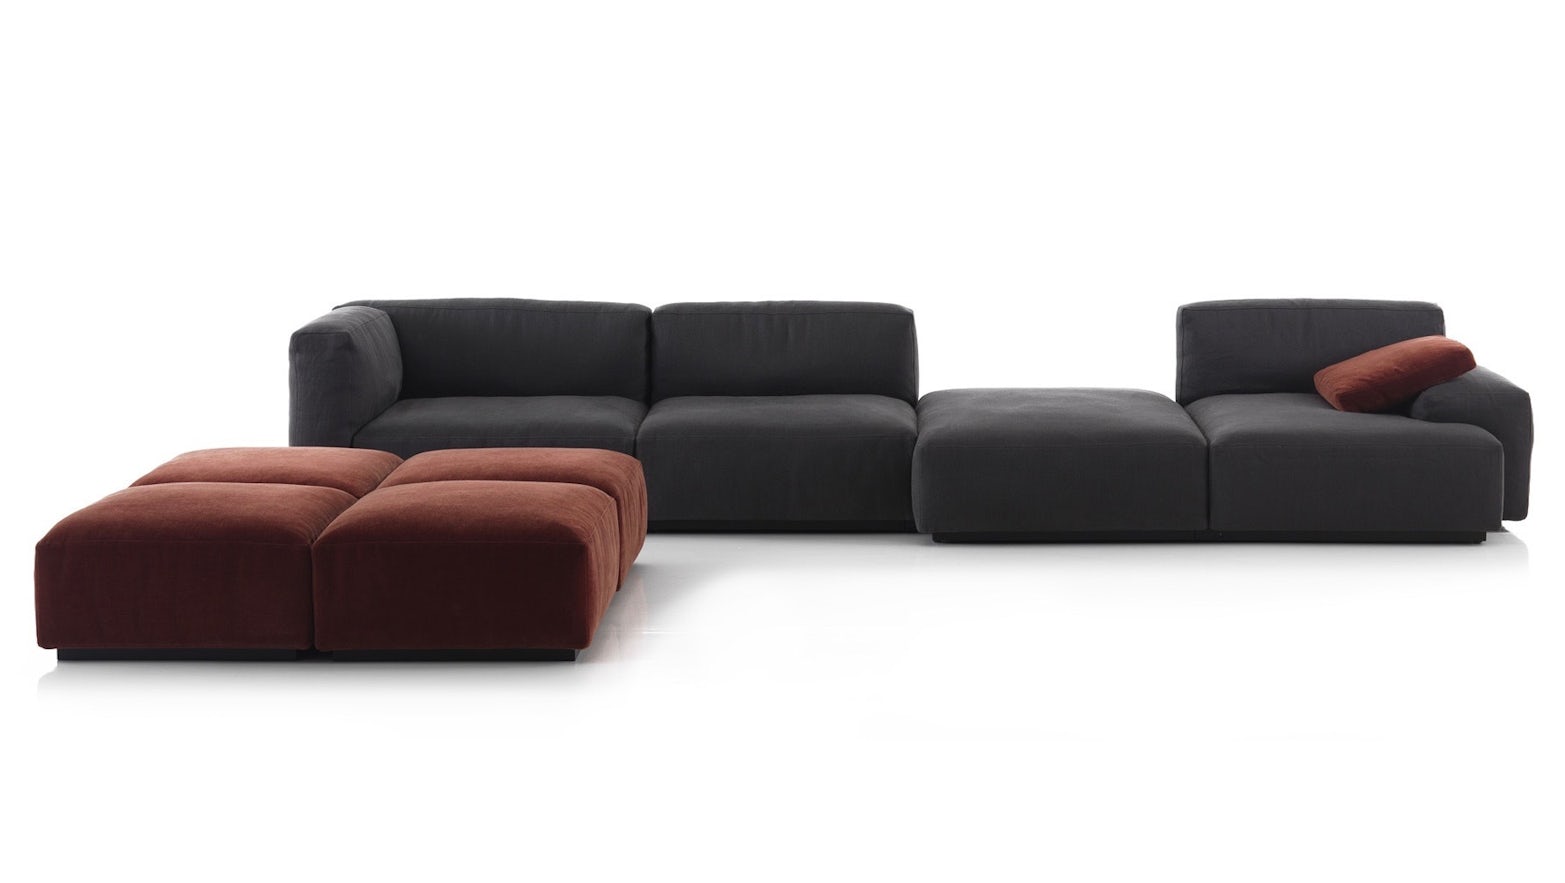 Mex Cube Seating System Cassina 4